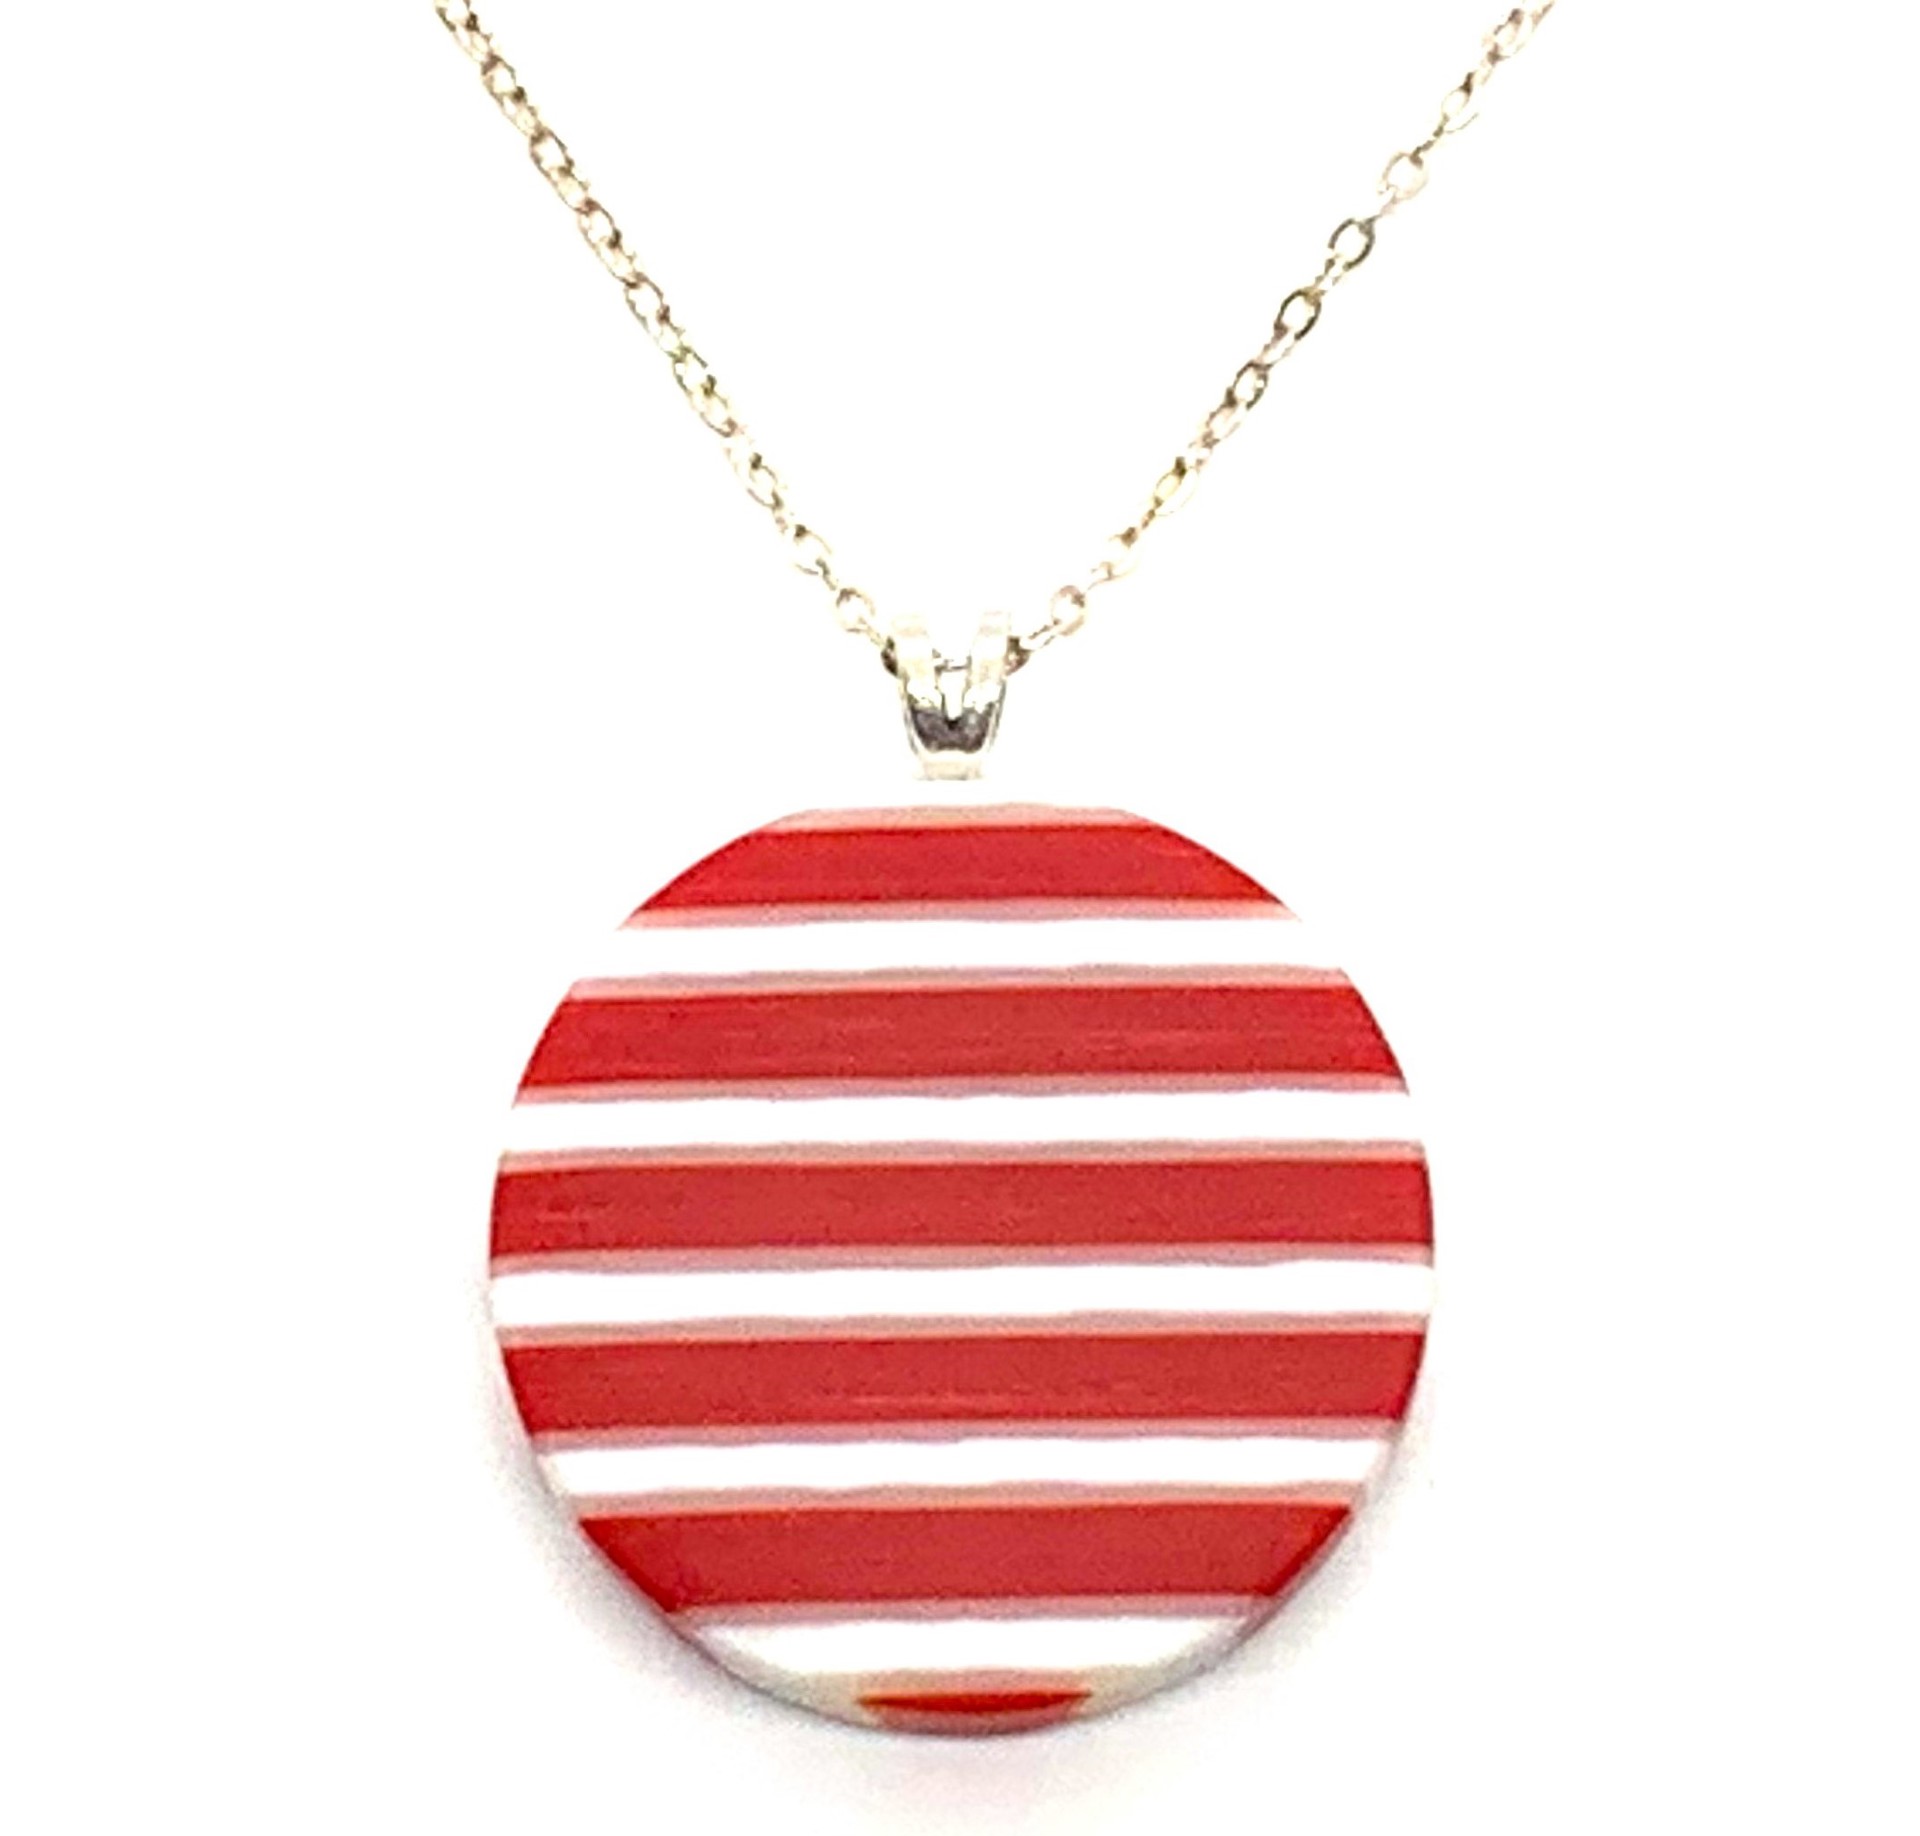 On Edge Necklace by Chris Cox